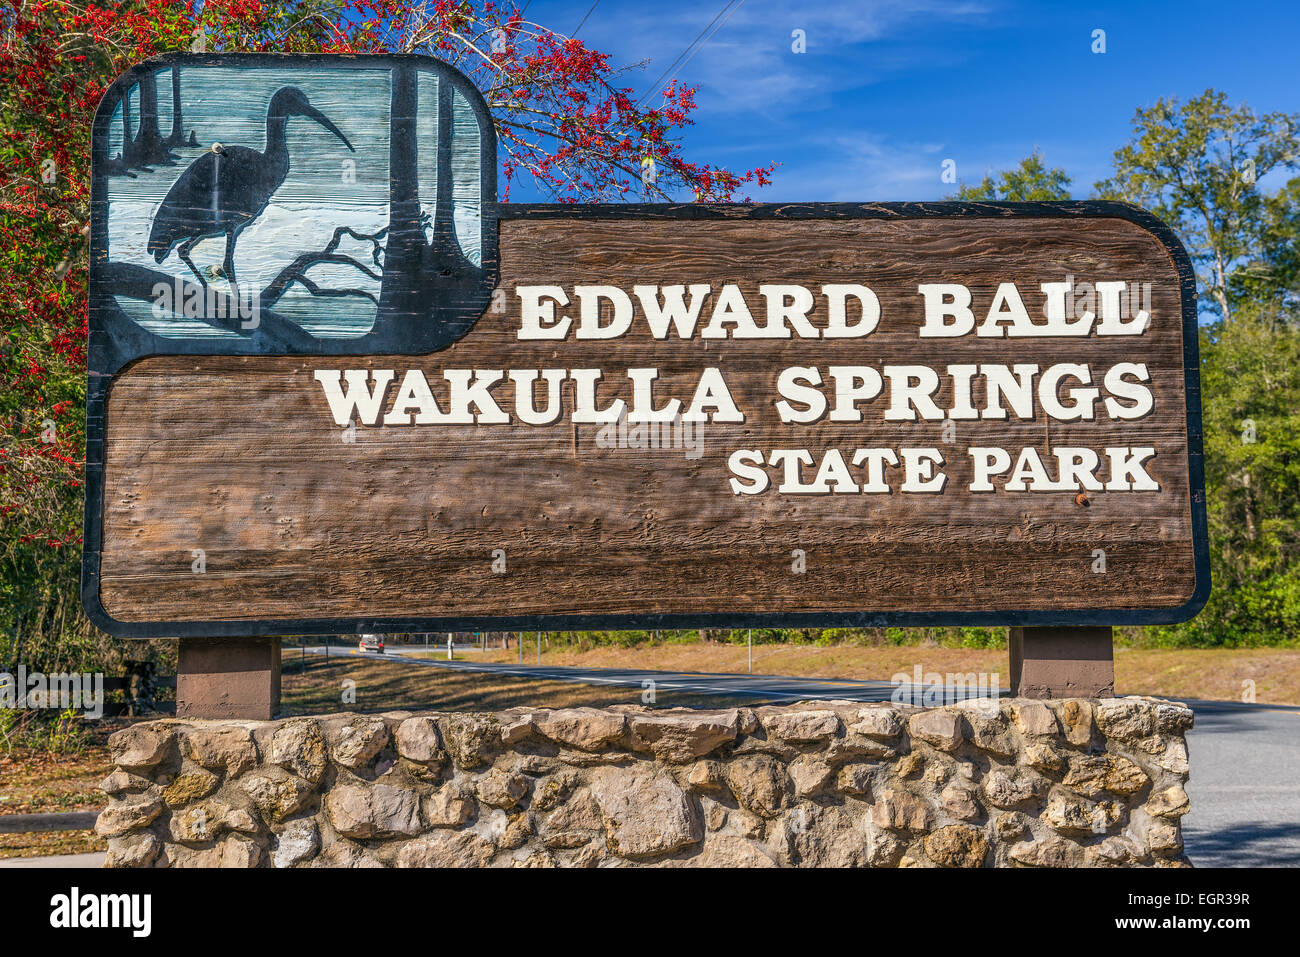 Edward Ball Wakulla Springs entrance sign.  This florida state park is located south of Tallahassee, Florida. Stock Photo